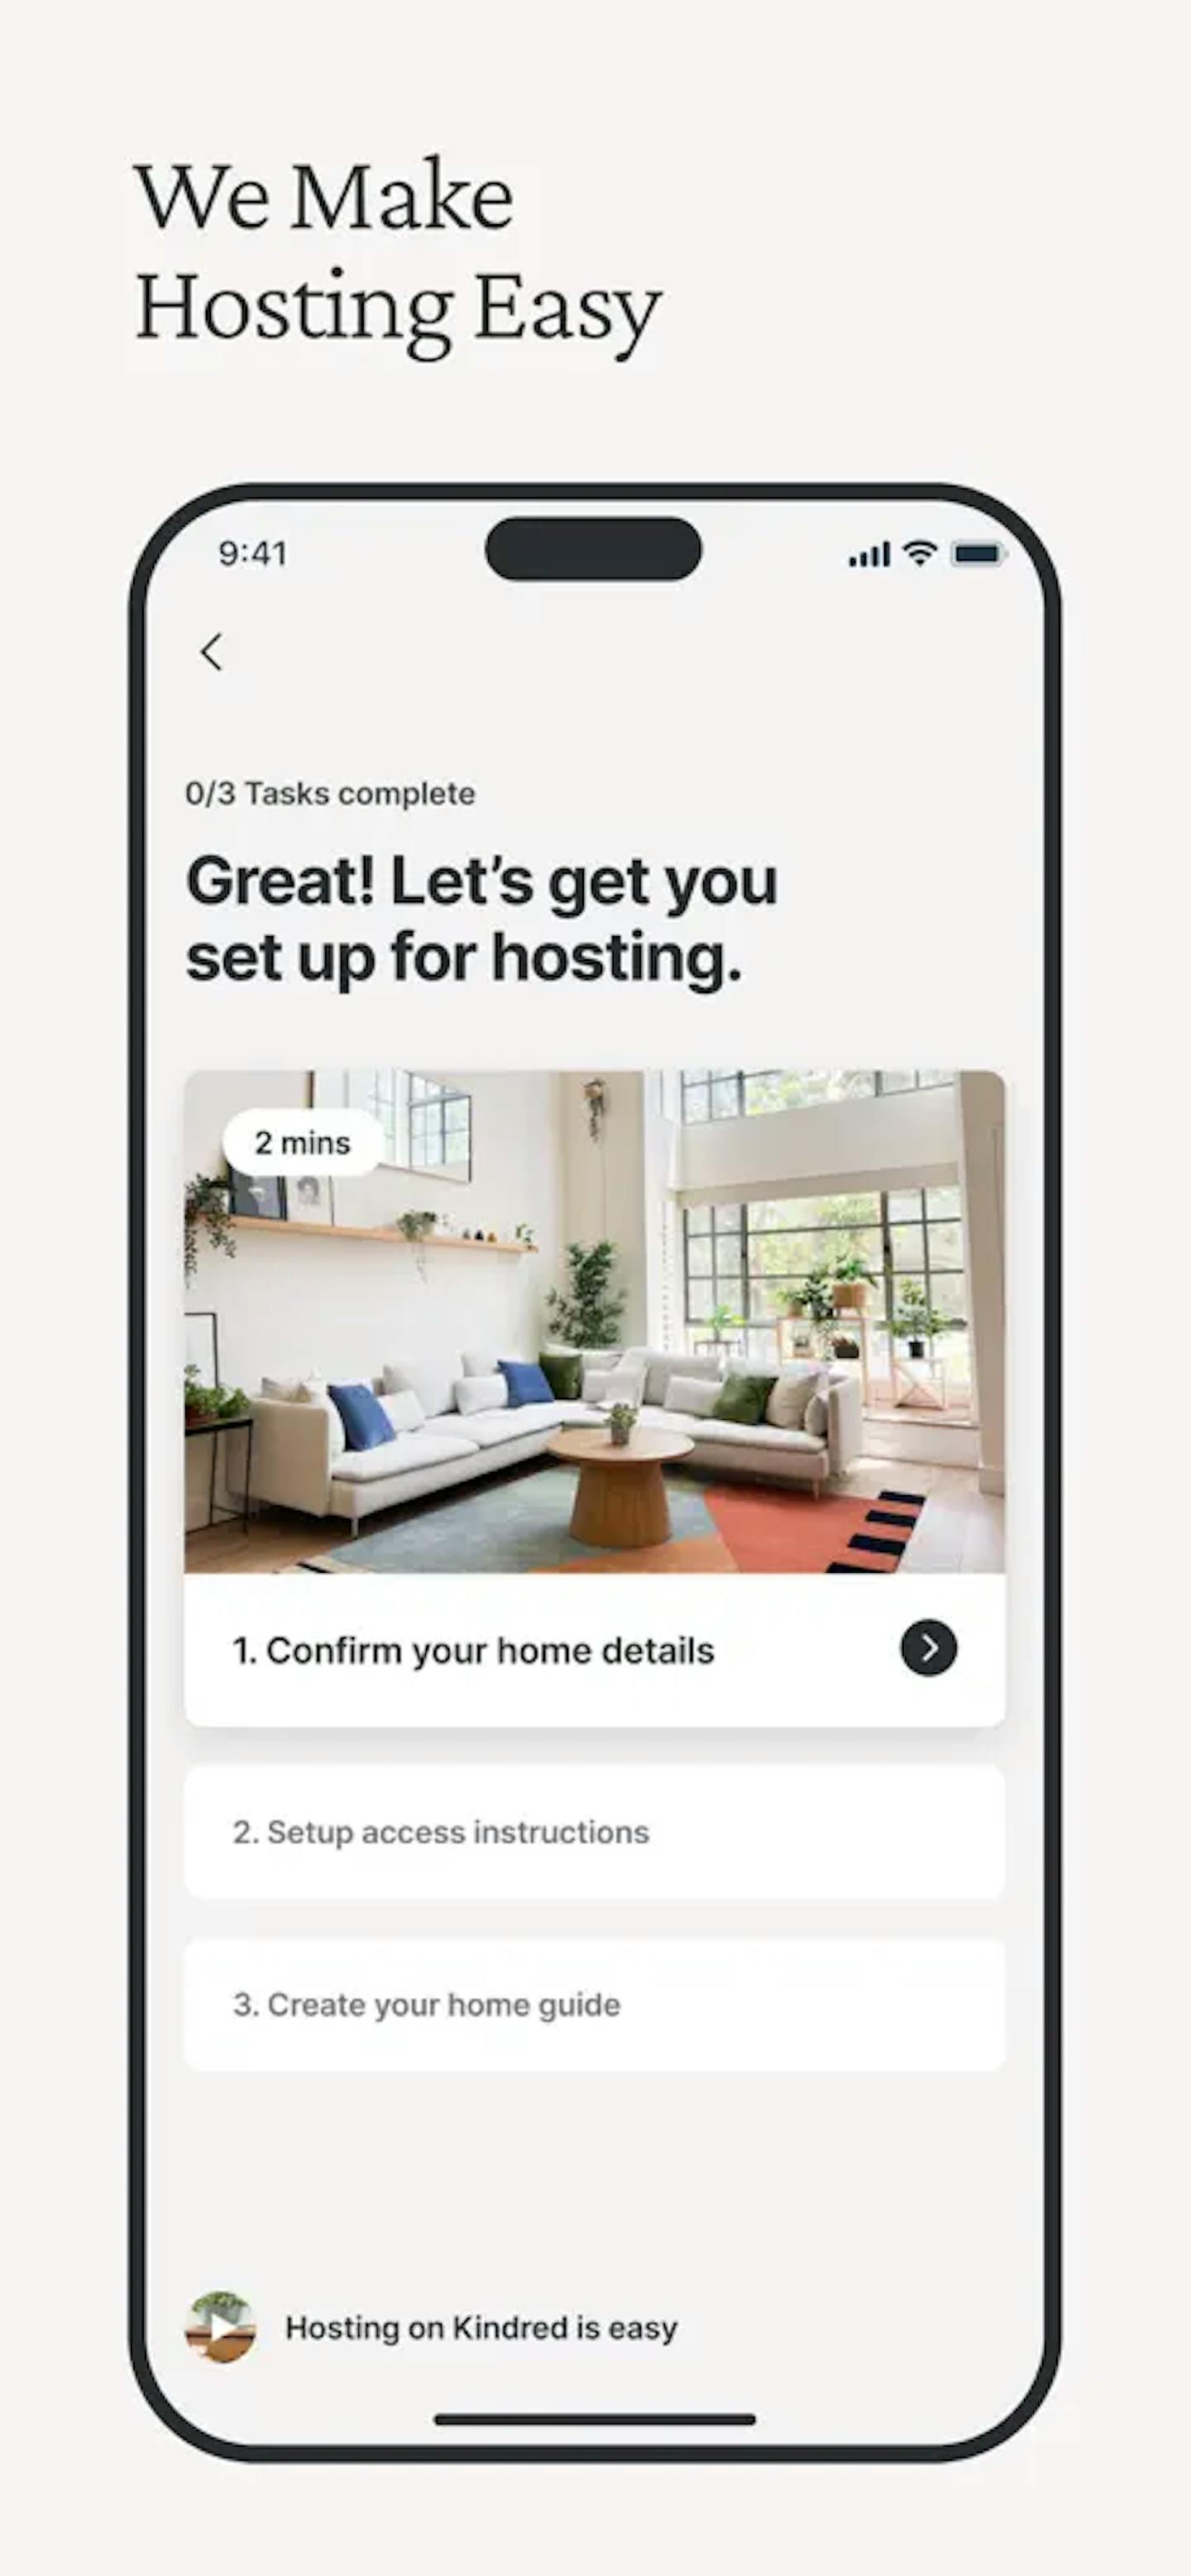 Easy hosting on Kindred - Showcasing a user-friendly guide for listing your home, emphasizing the support provided for cleaning and preparation to ensure a welcoming experience for guests.